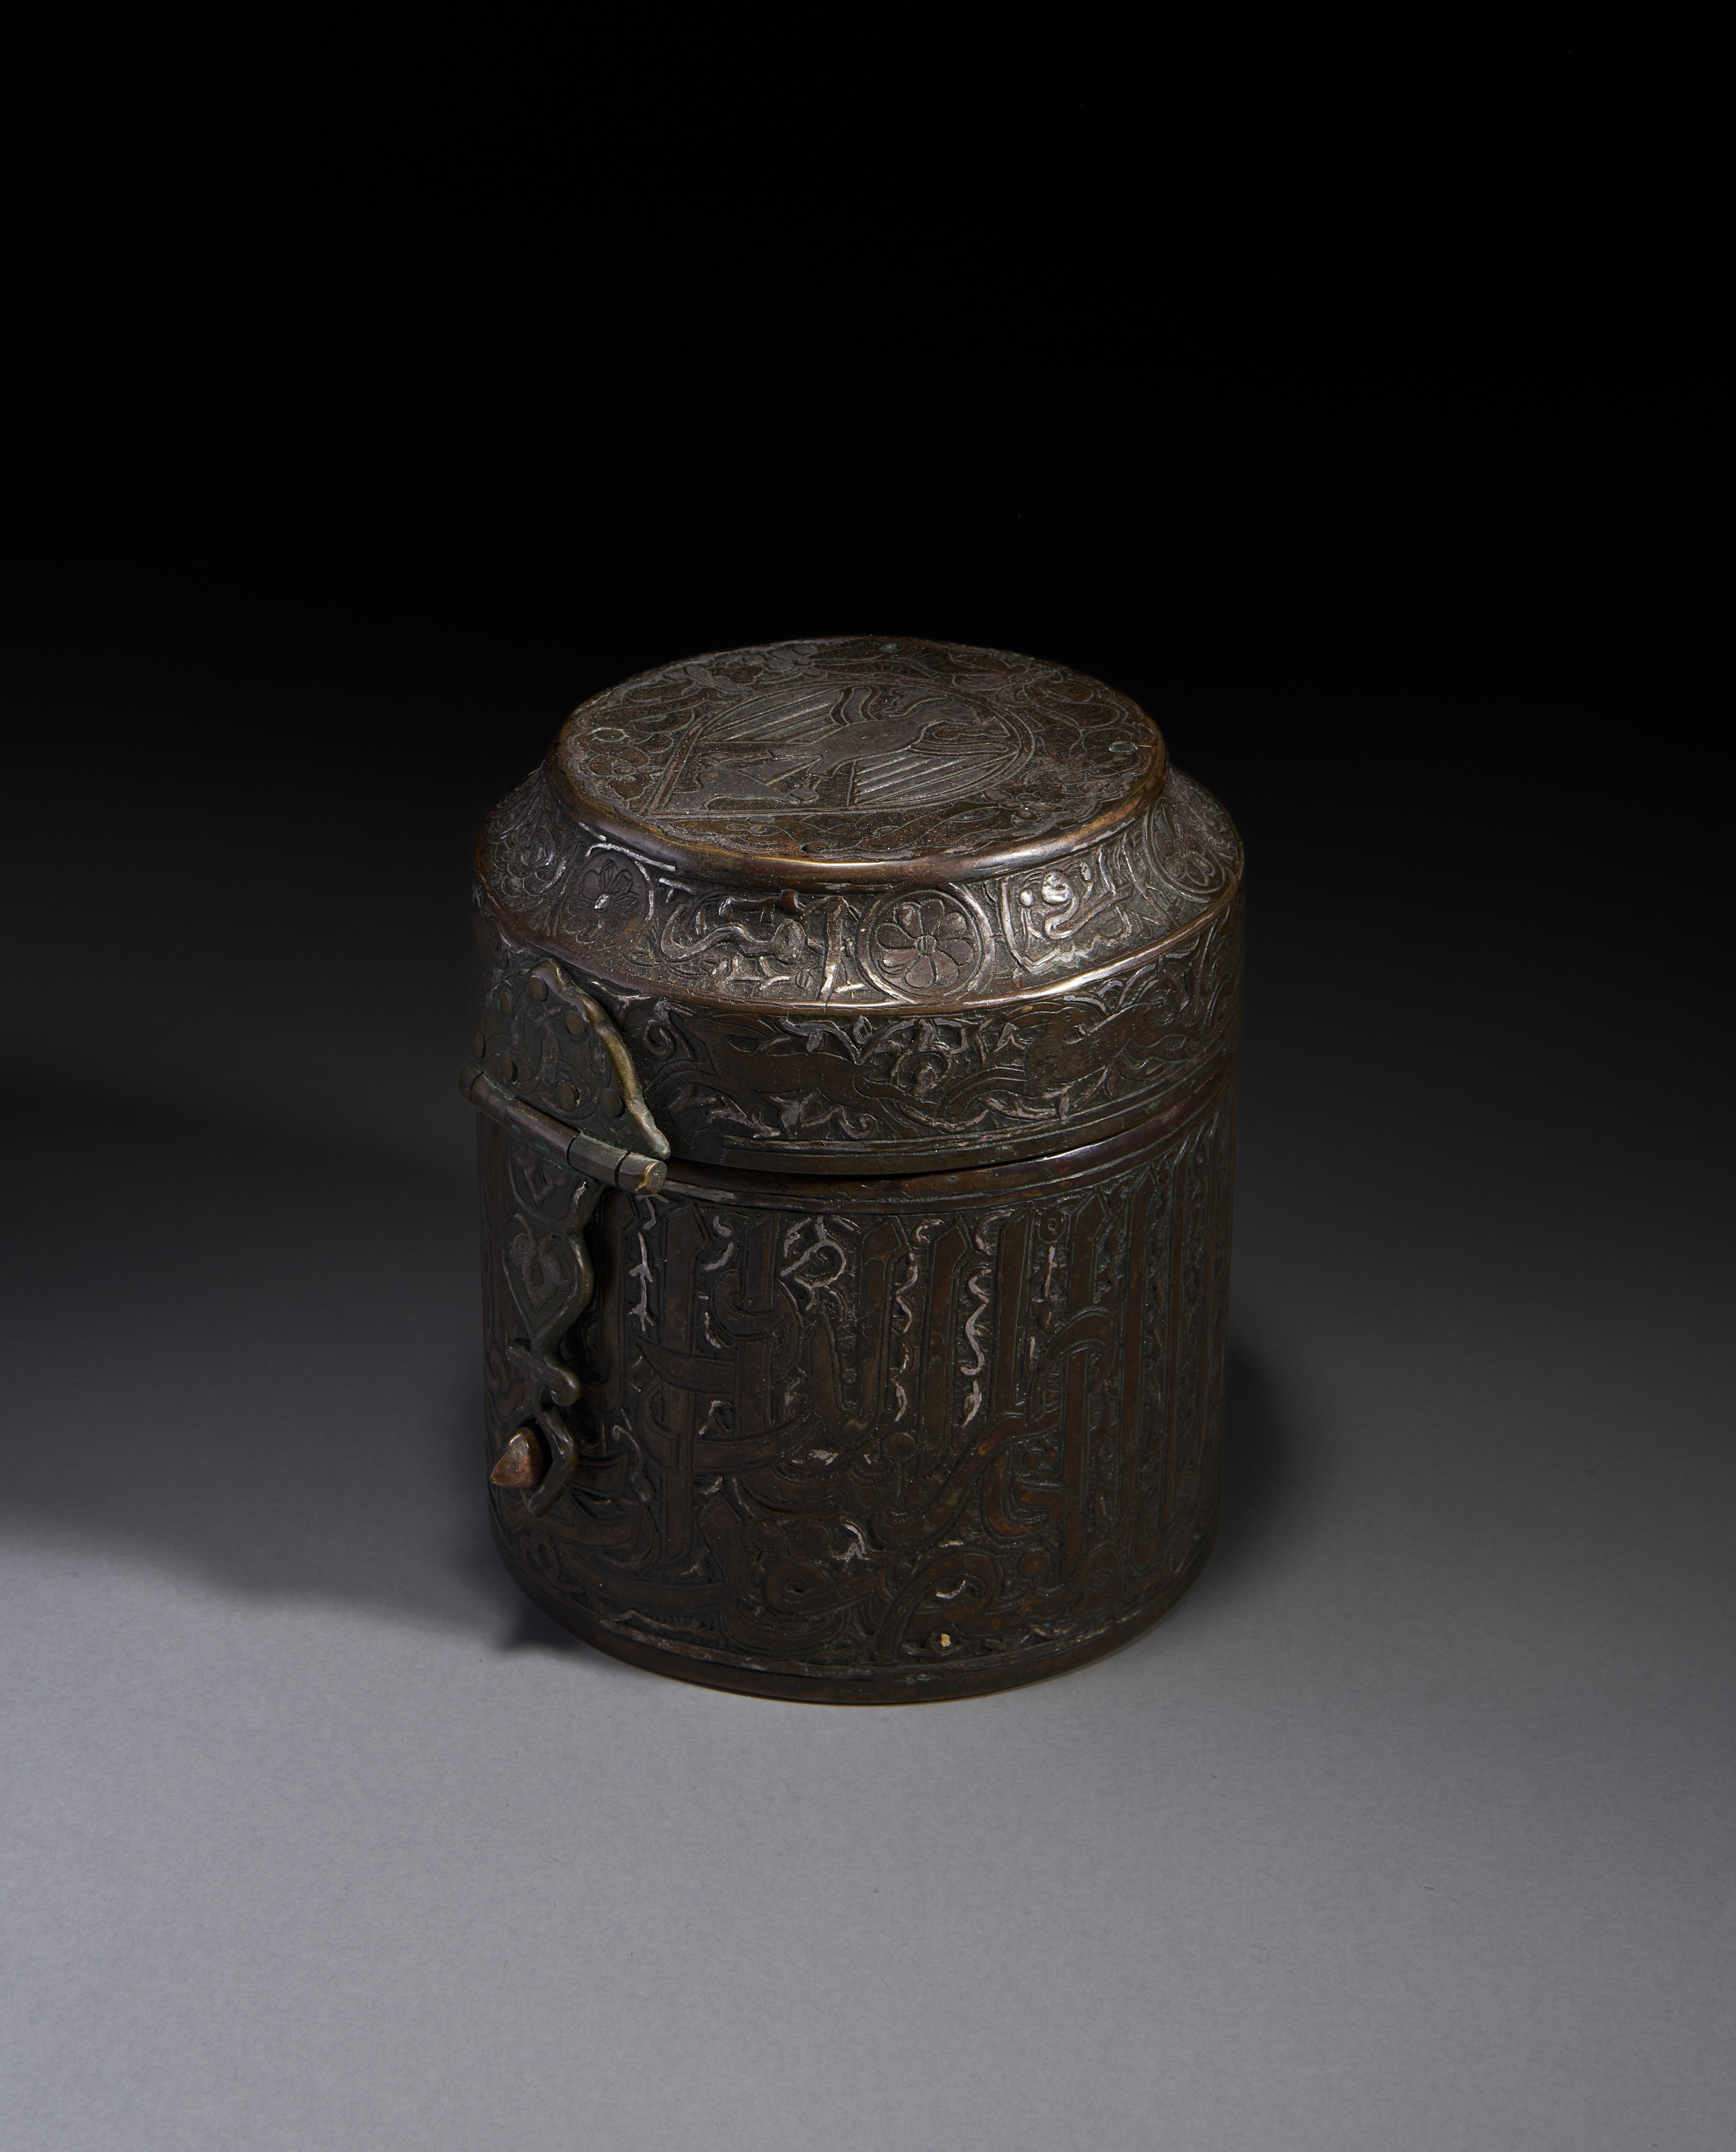 A SILVER INLAID SELJUK BRONZE INKWELL PENDANT, PERSIA, 12TH CENTURY - Image 2 of 8